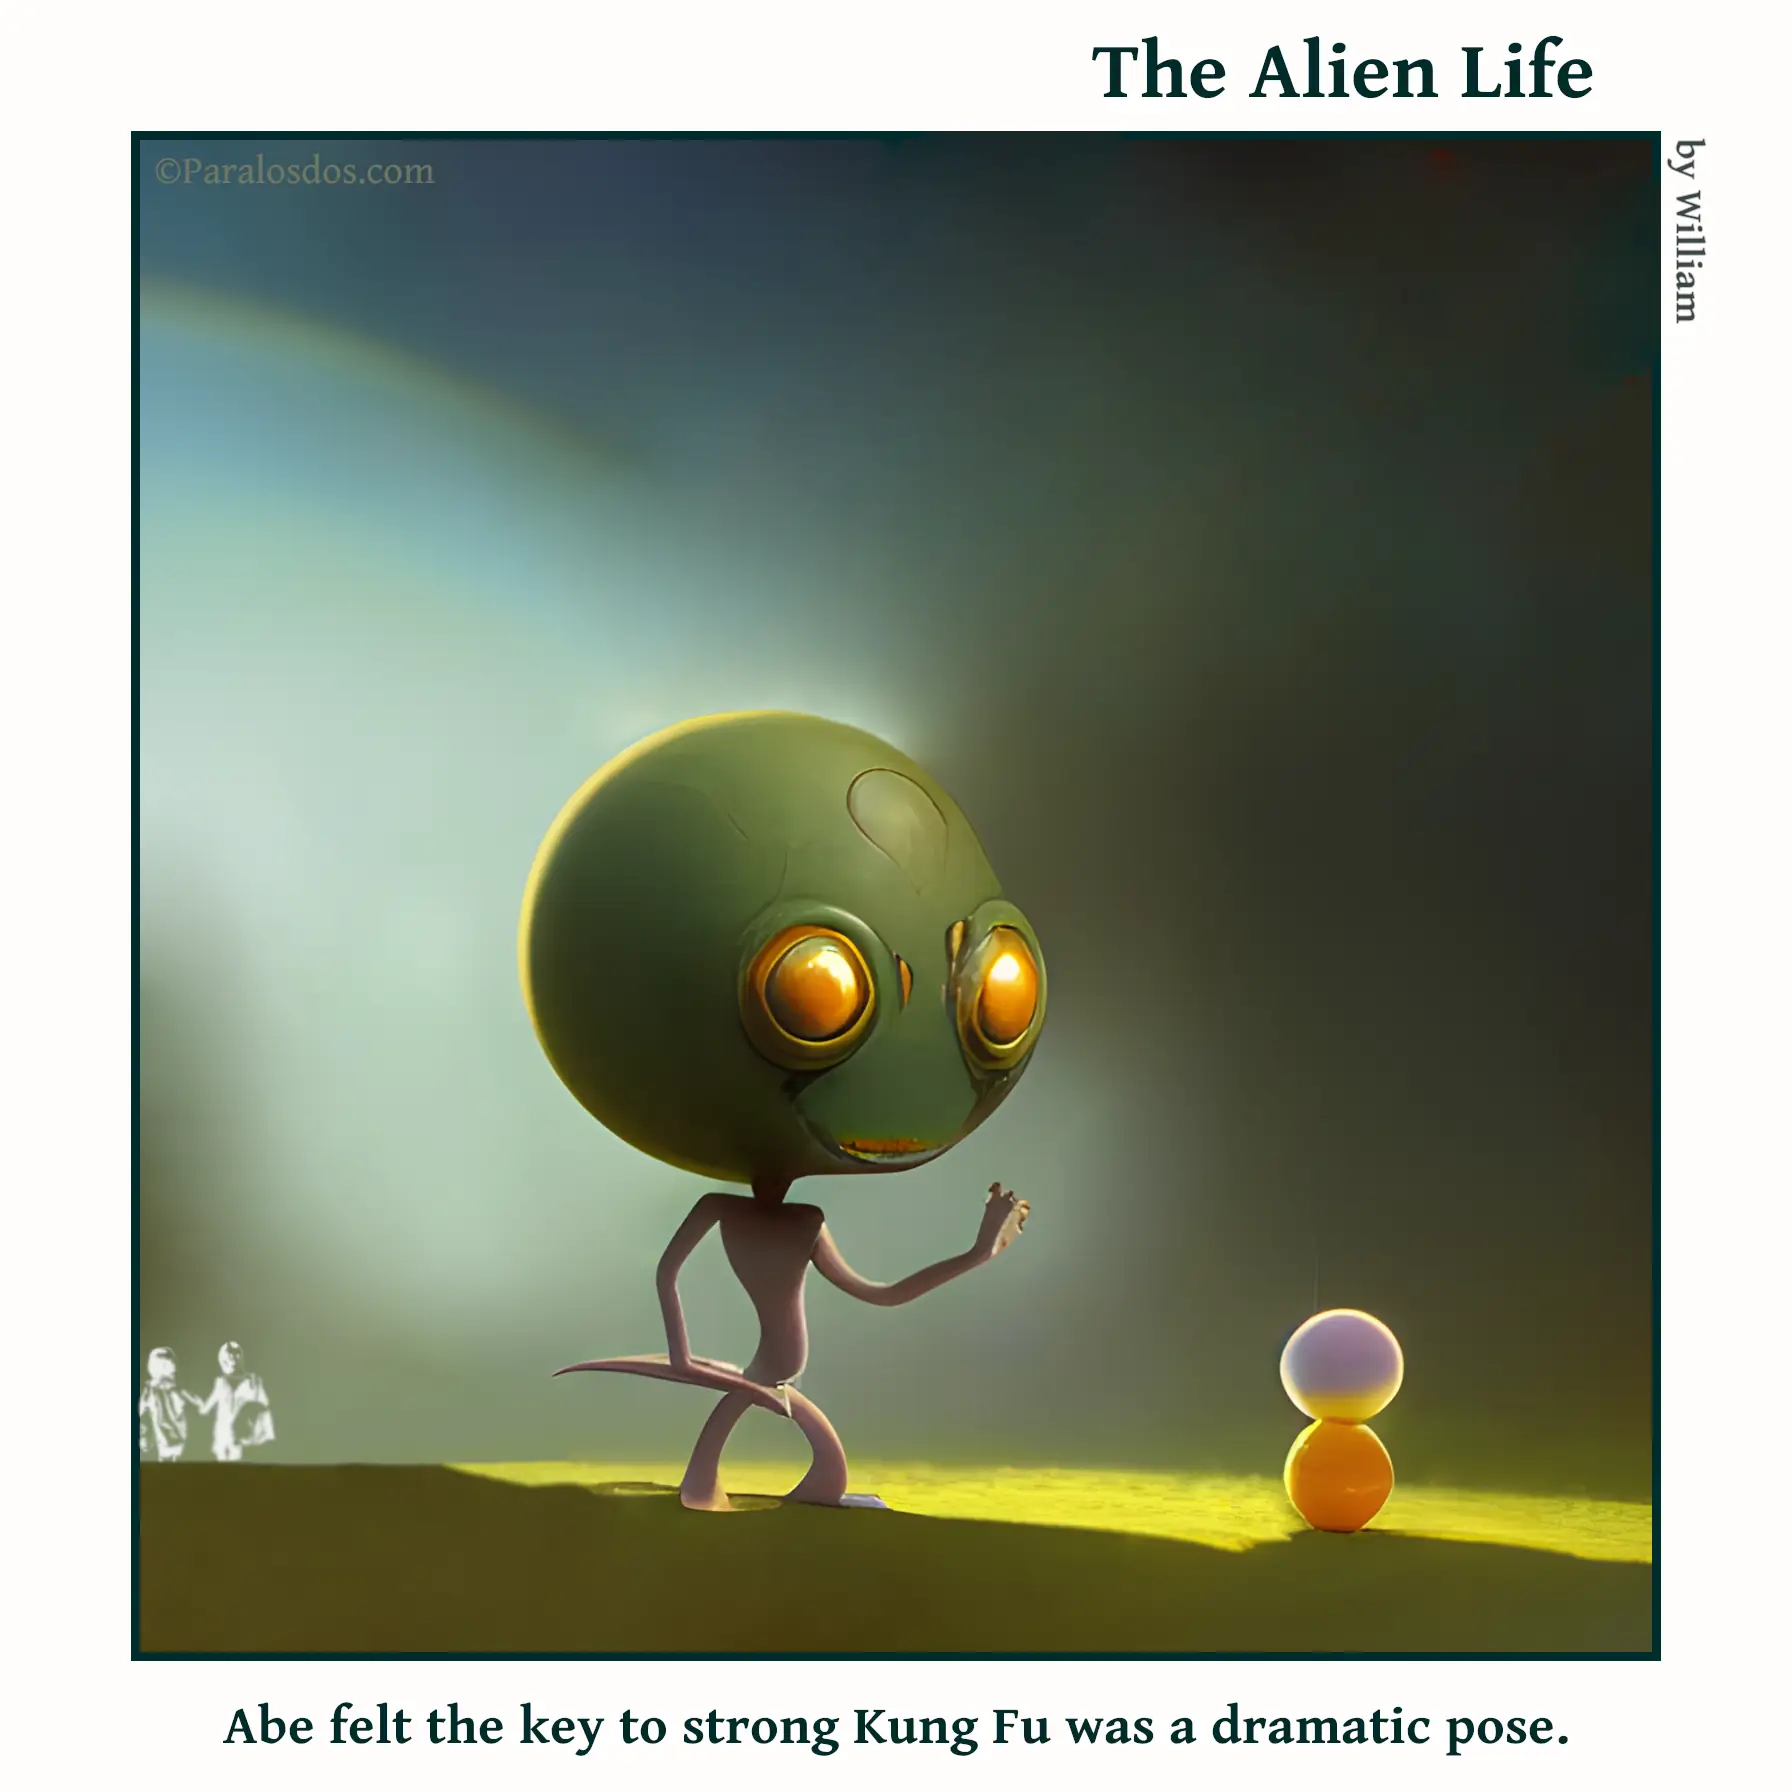 The Alien Life, one panel Comic. An alien is standing in a dramatic Kung Fu pose. The caption reads: Abe felt the key to strong Kung Fu was a dramatic pose.